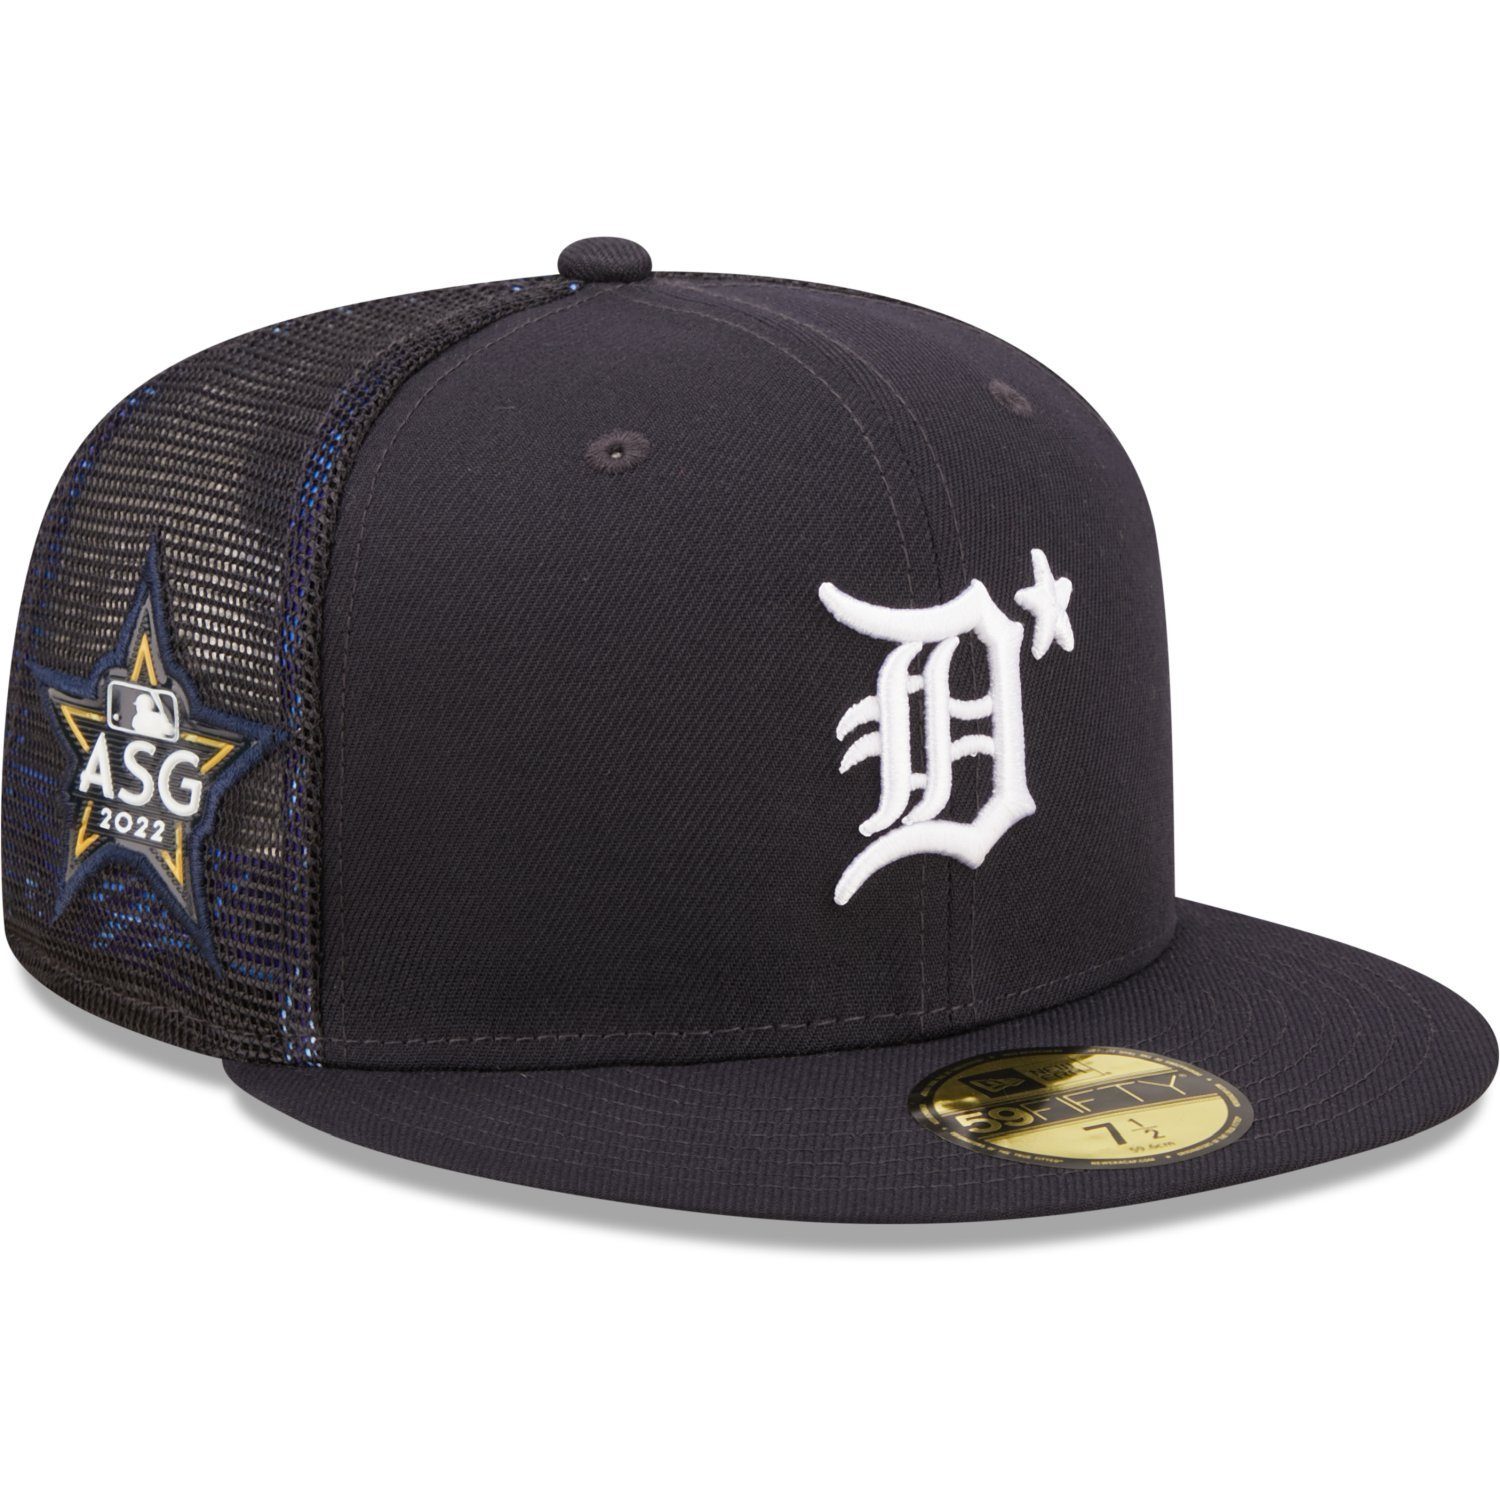 New Era Fitted Cap 59Fifty ALLSTAR GAME Detroit Tigers